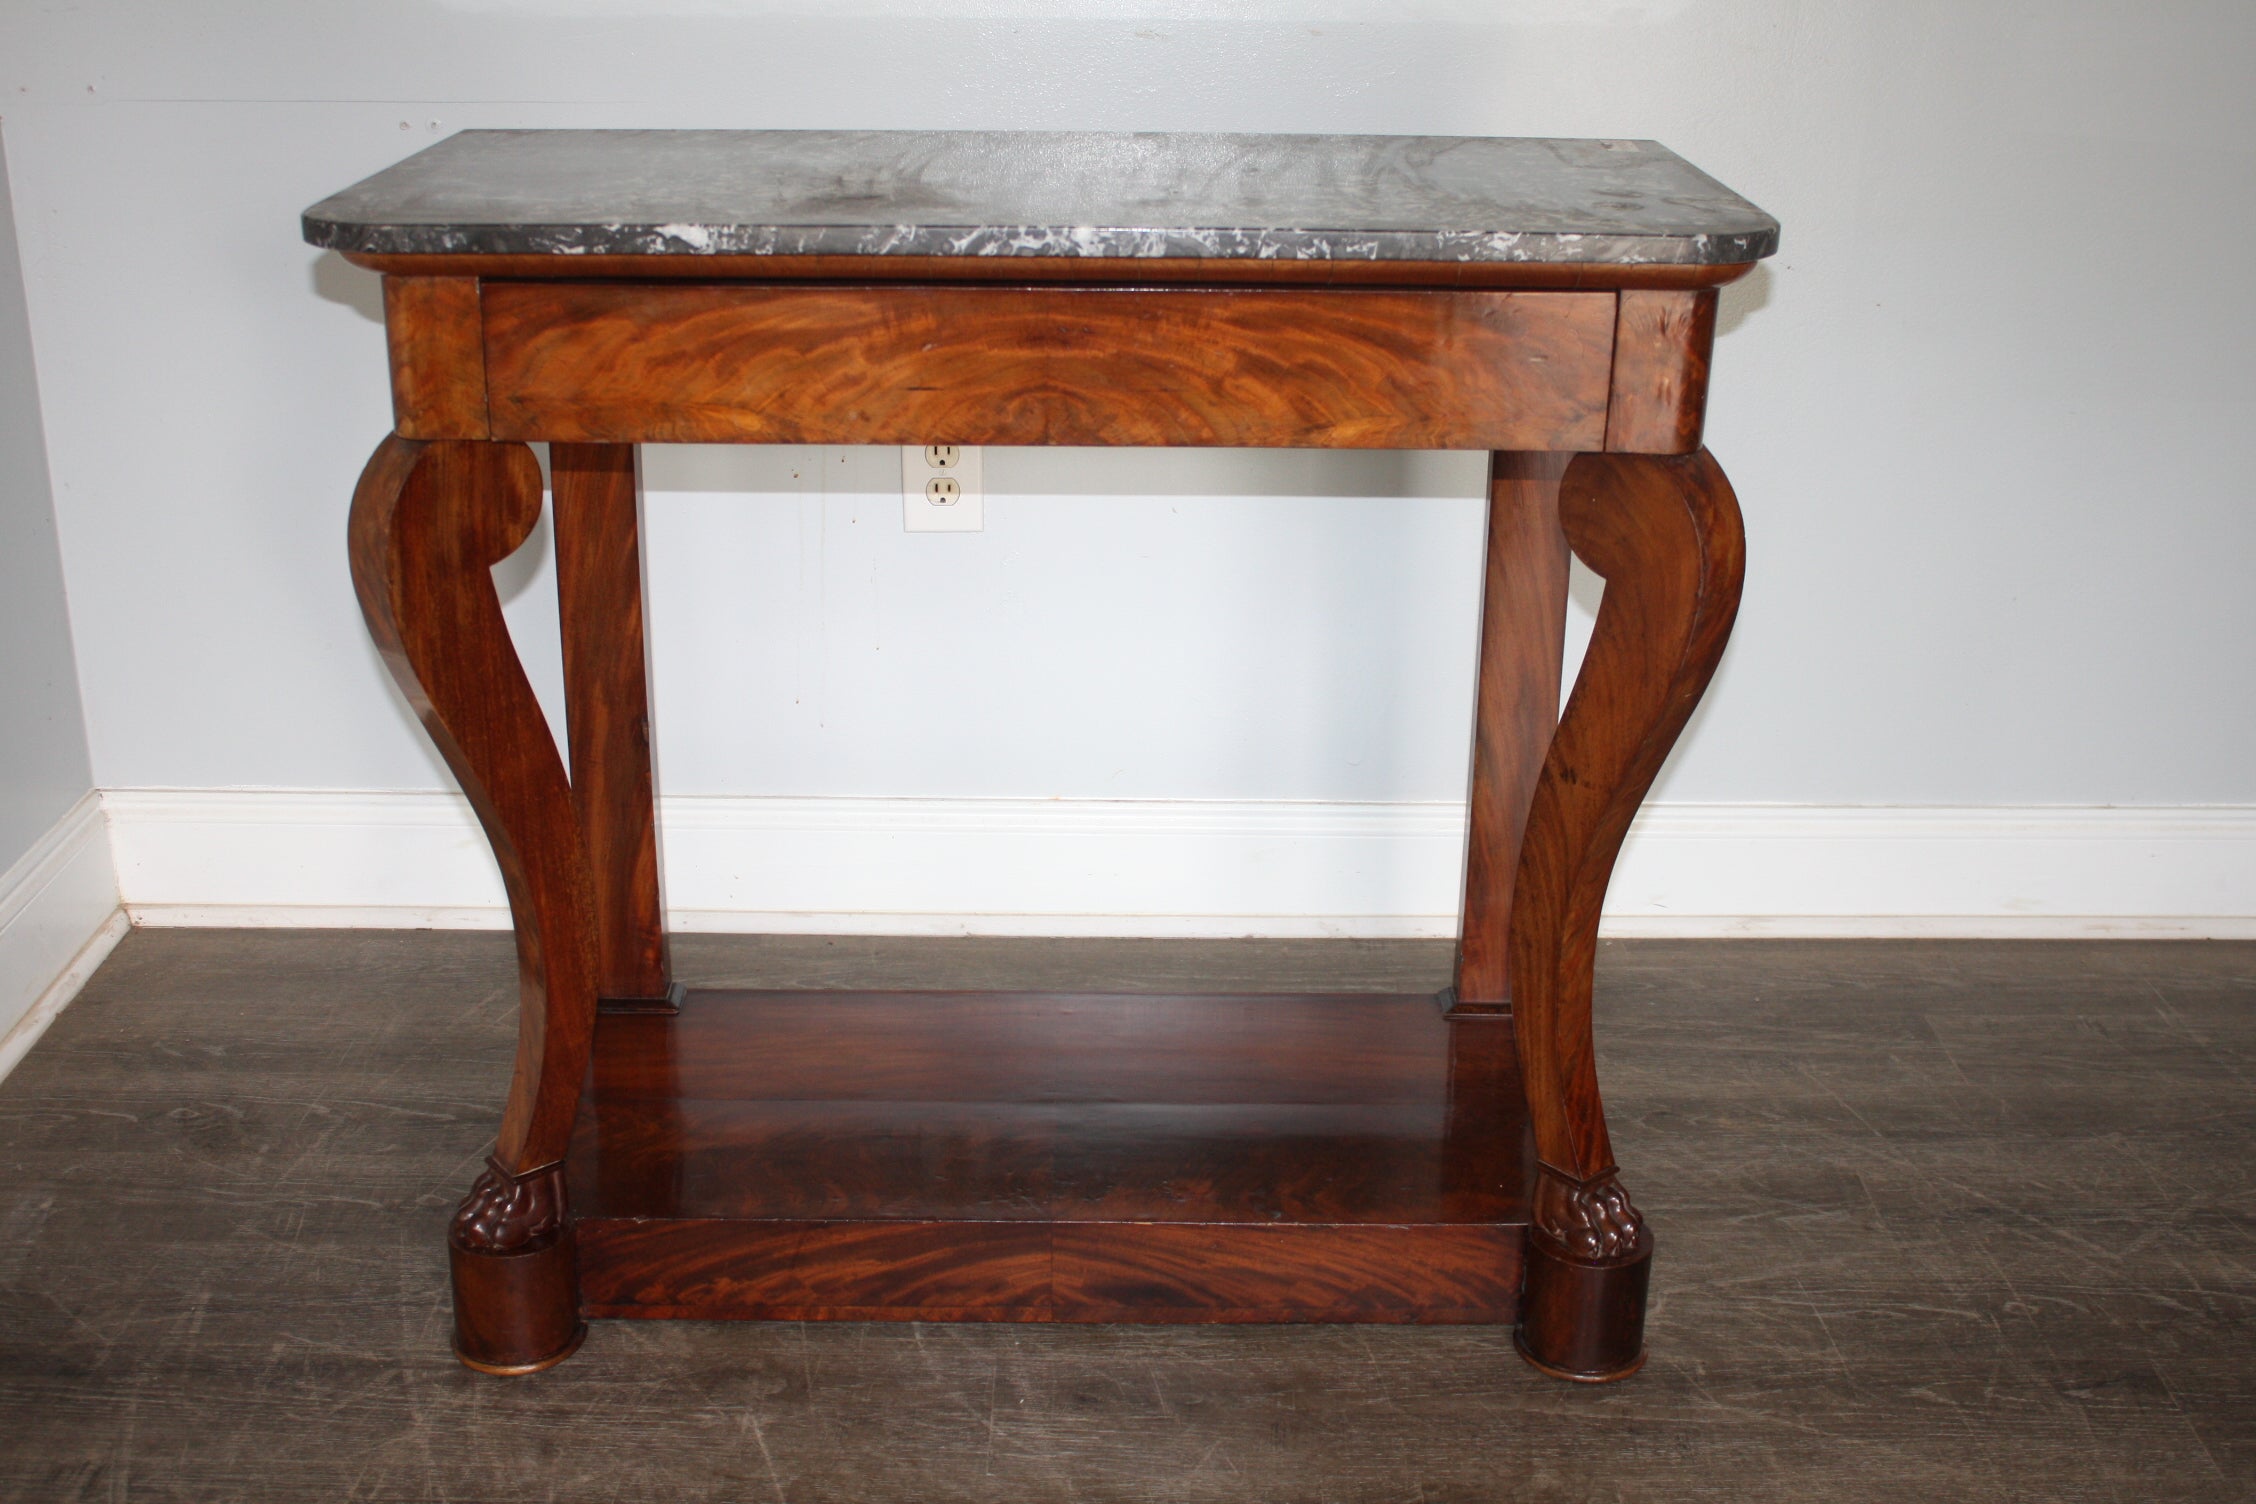 This wonderful console is made of blond flamed mahogany with a Sainte-Anne marble top. It has a drawer hidden on the belt.